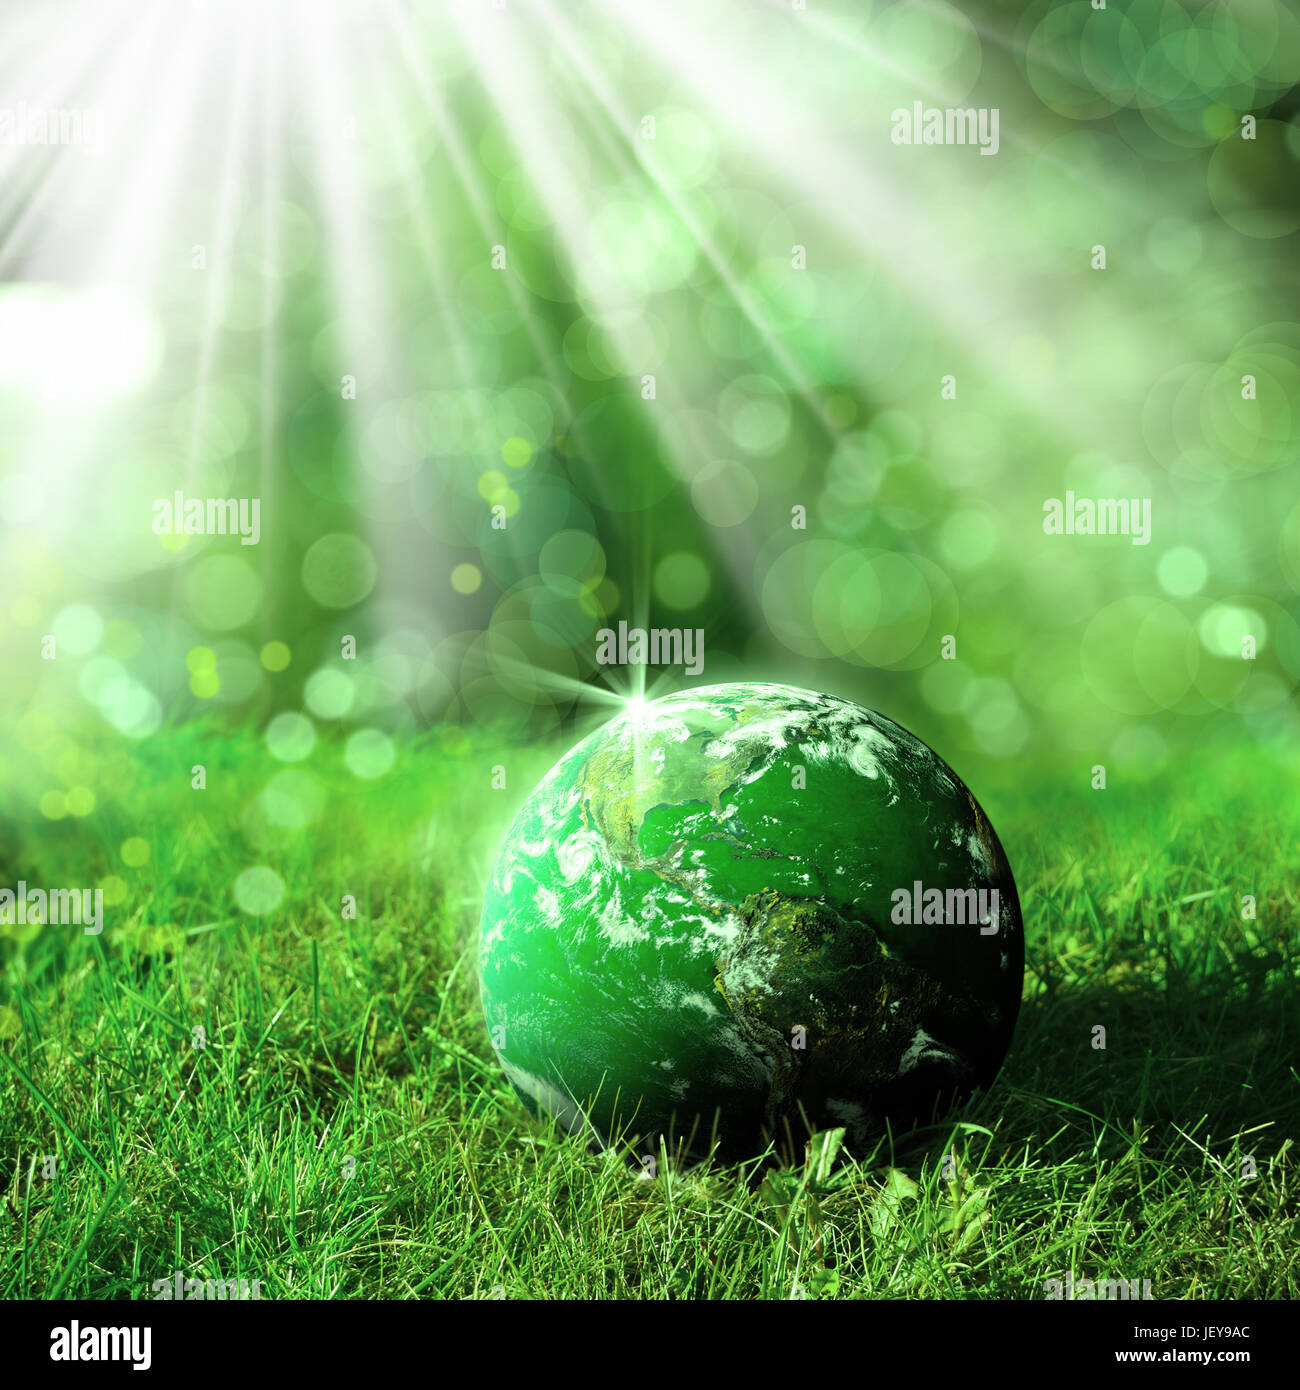 conceptual image of globe on green landscape and light. Furnished NASA image used for this image. Stock Photo